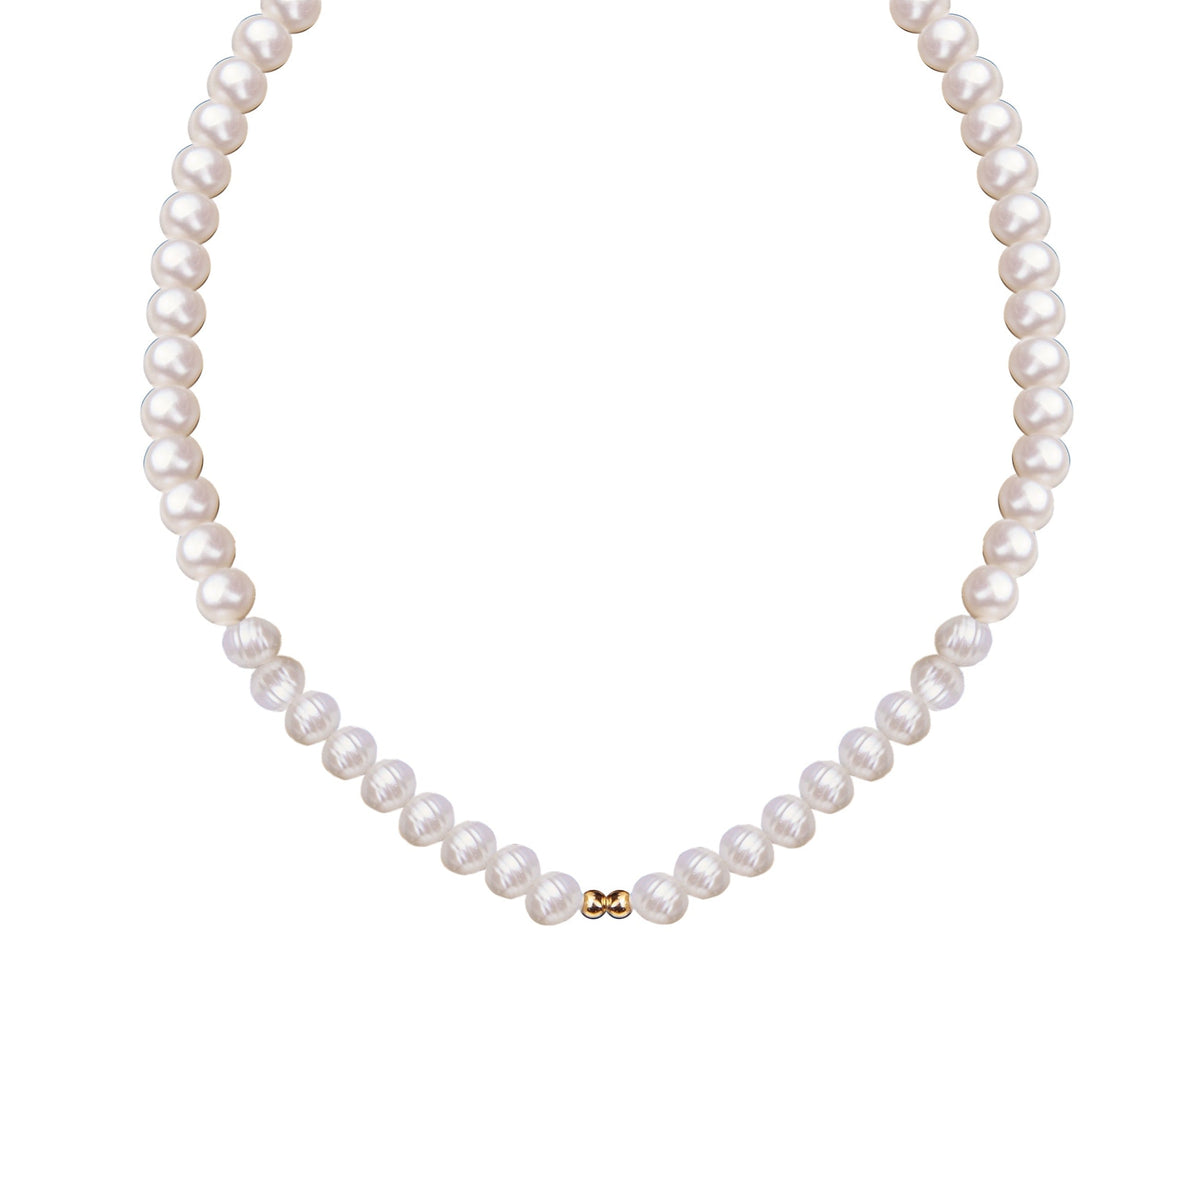 Clarity Necklace - Pearls